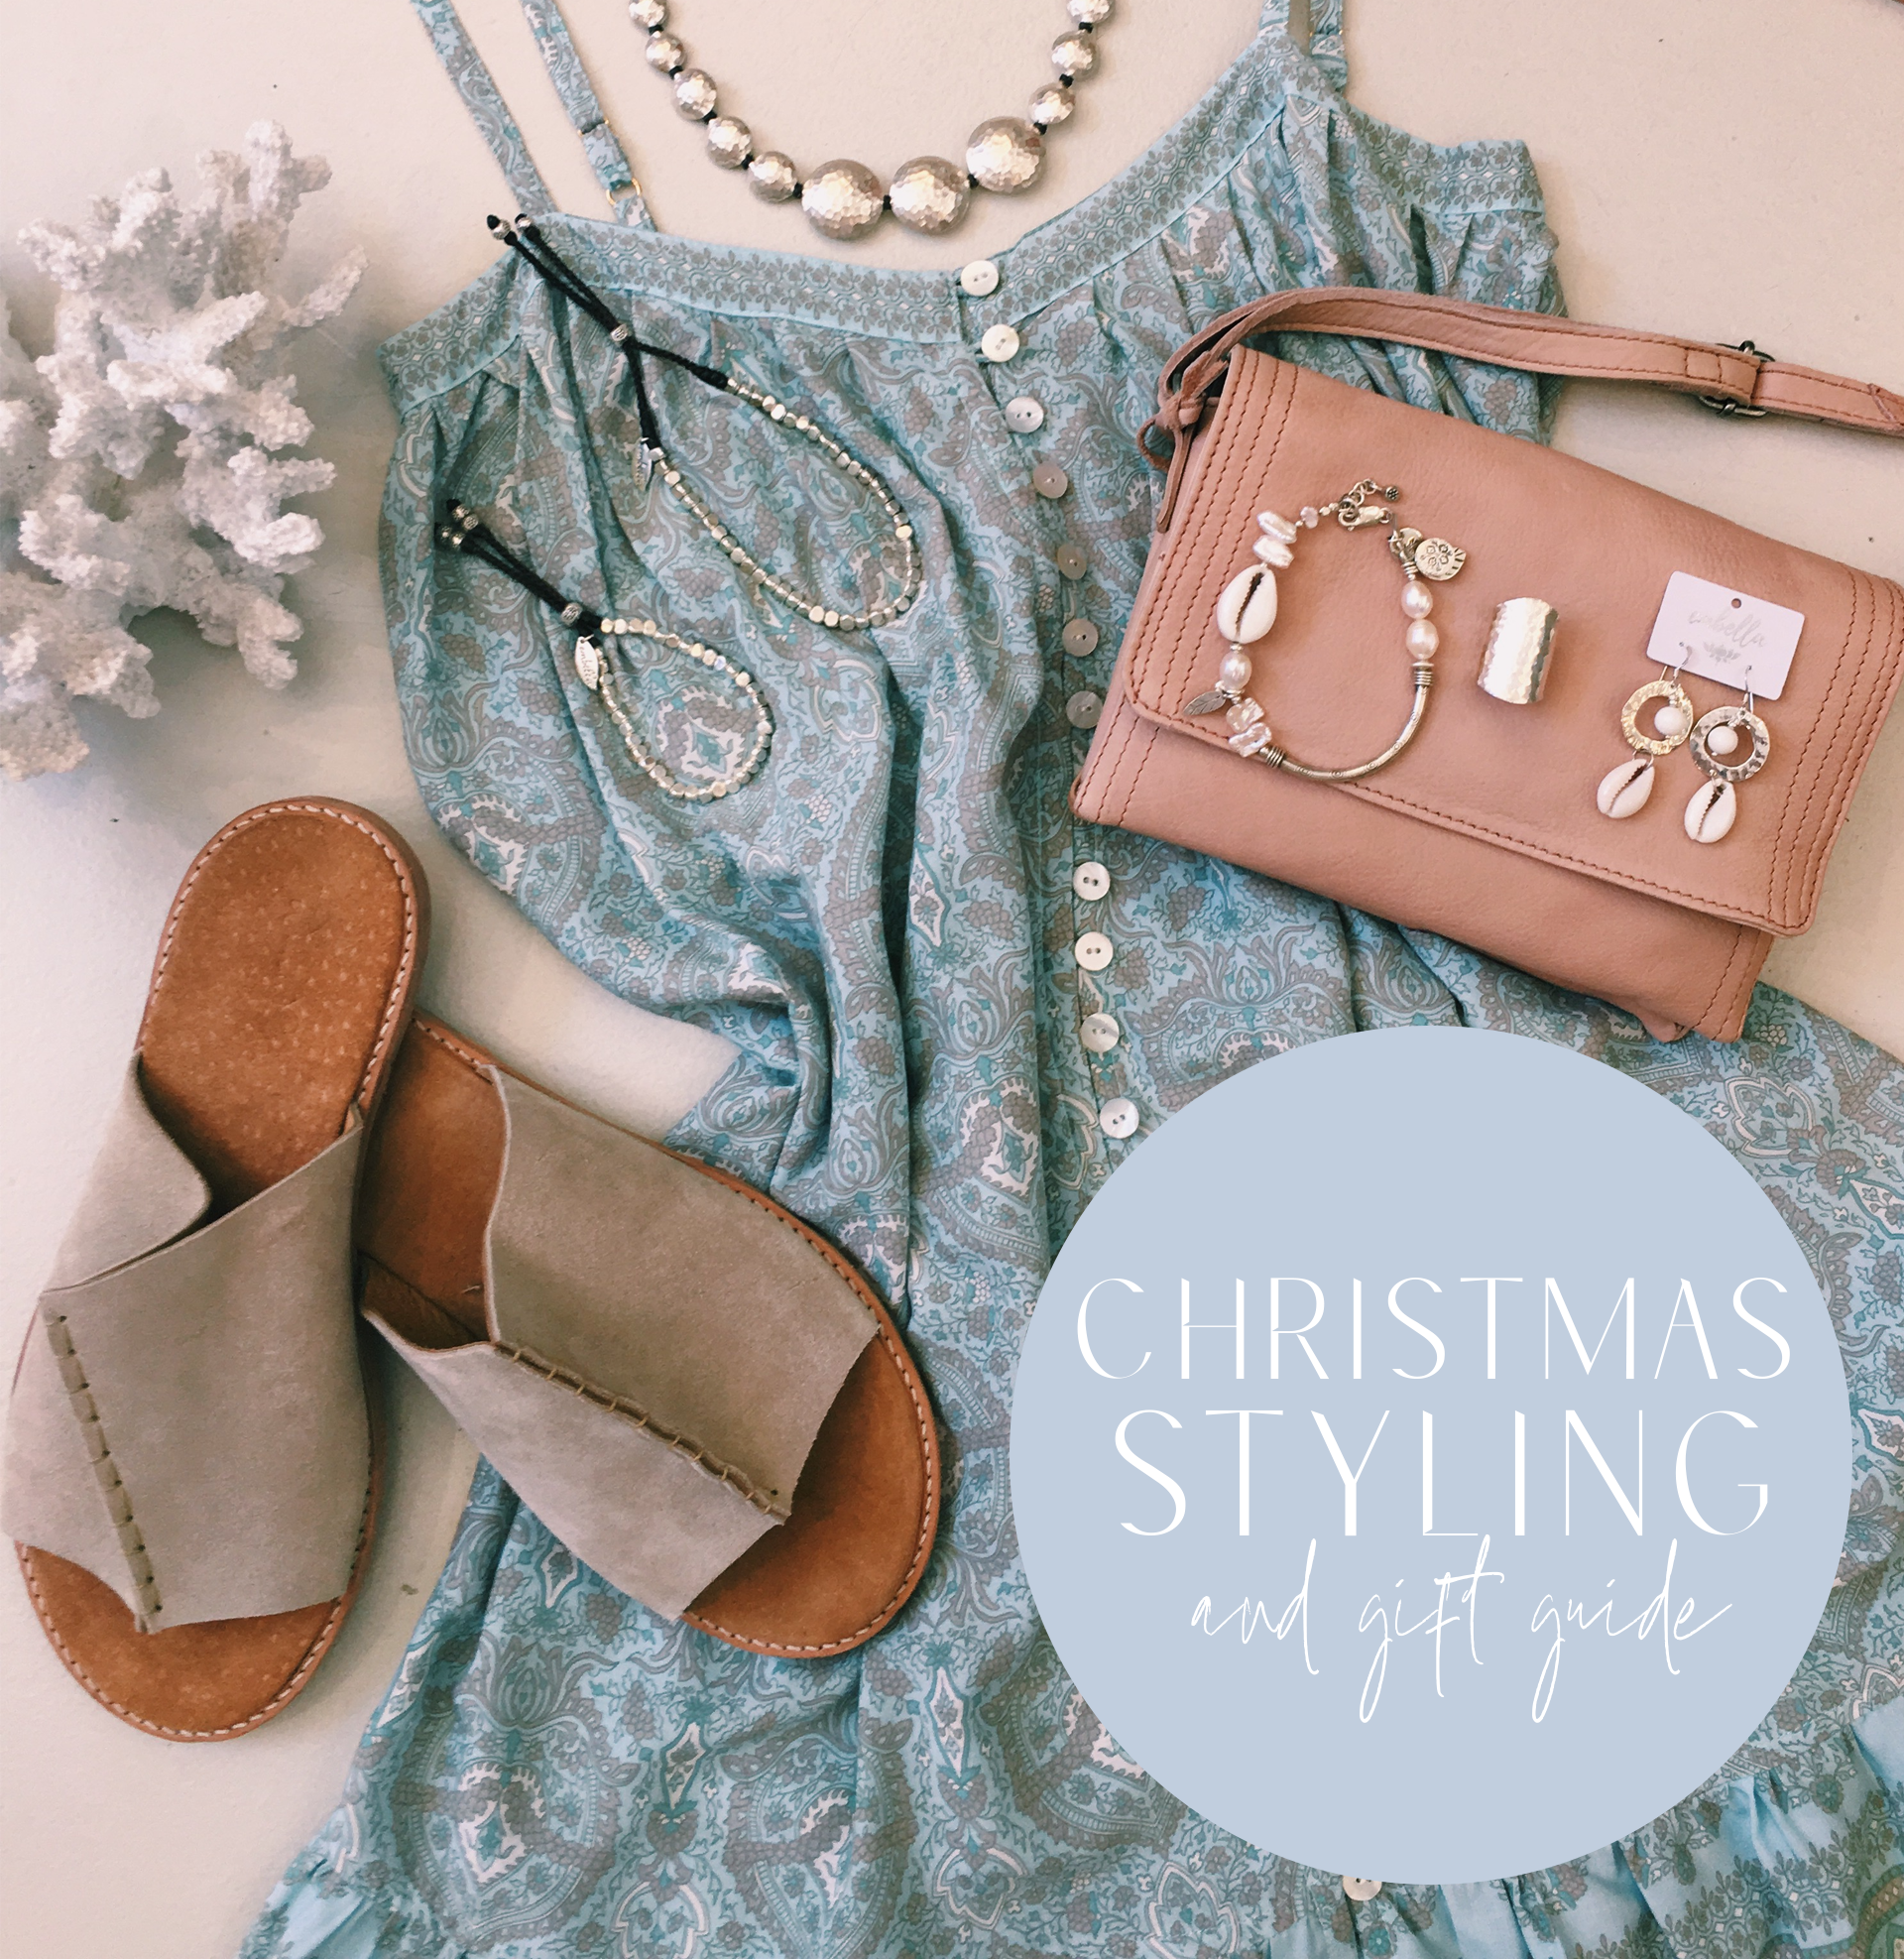 Christmas Styling and Gift Guide from Embella Jewellery